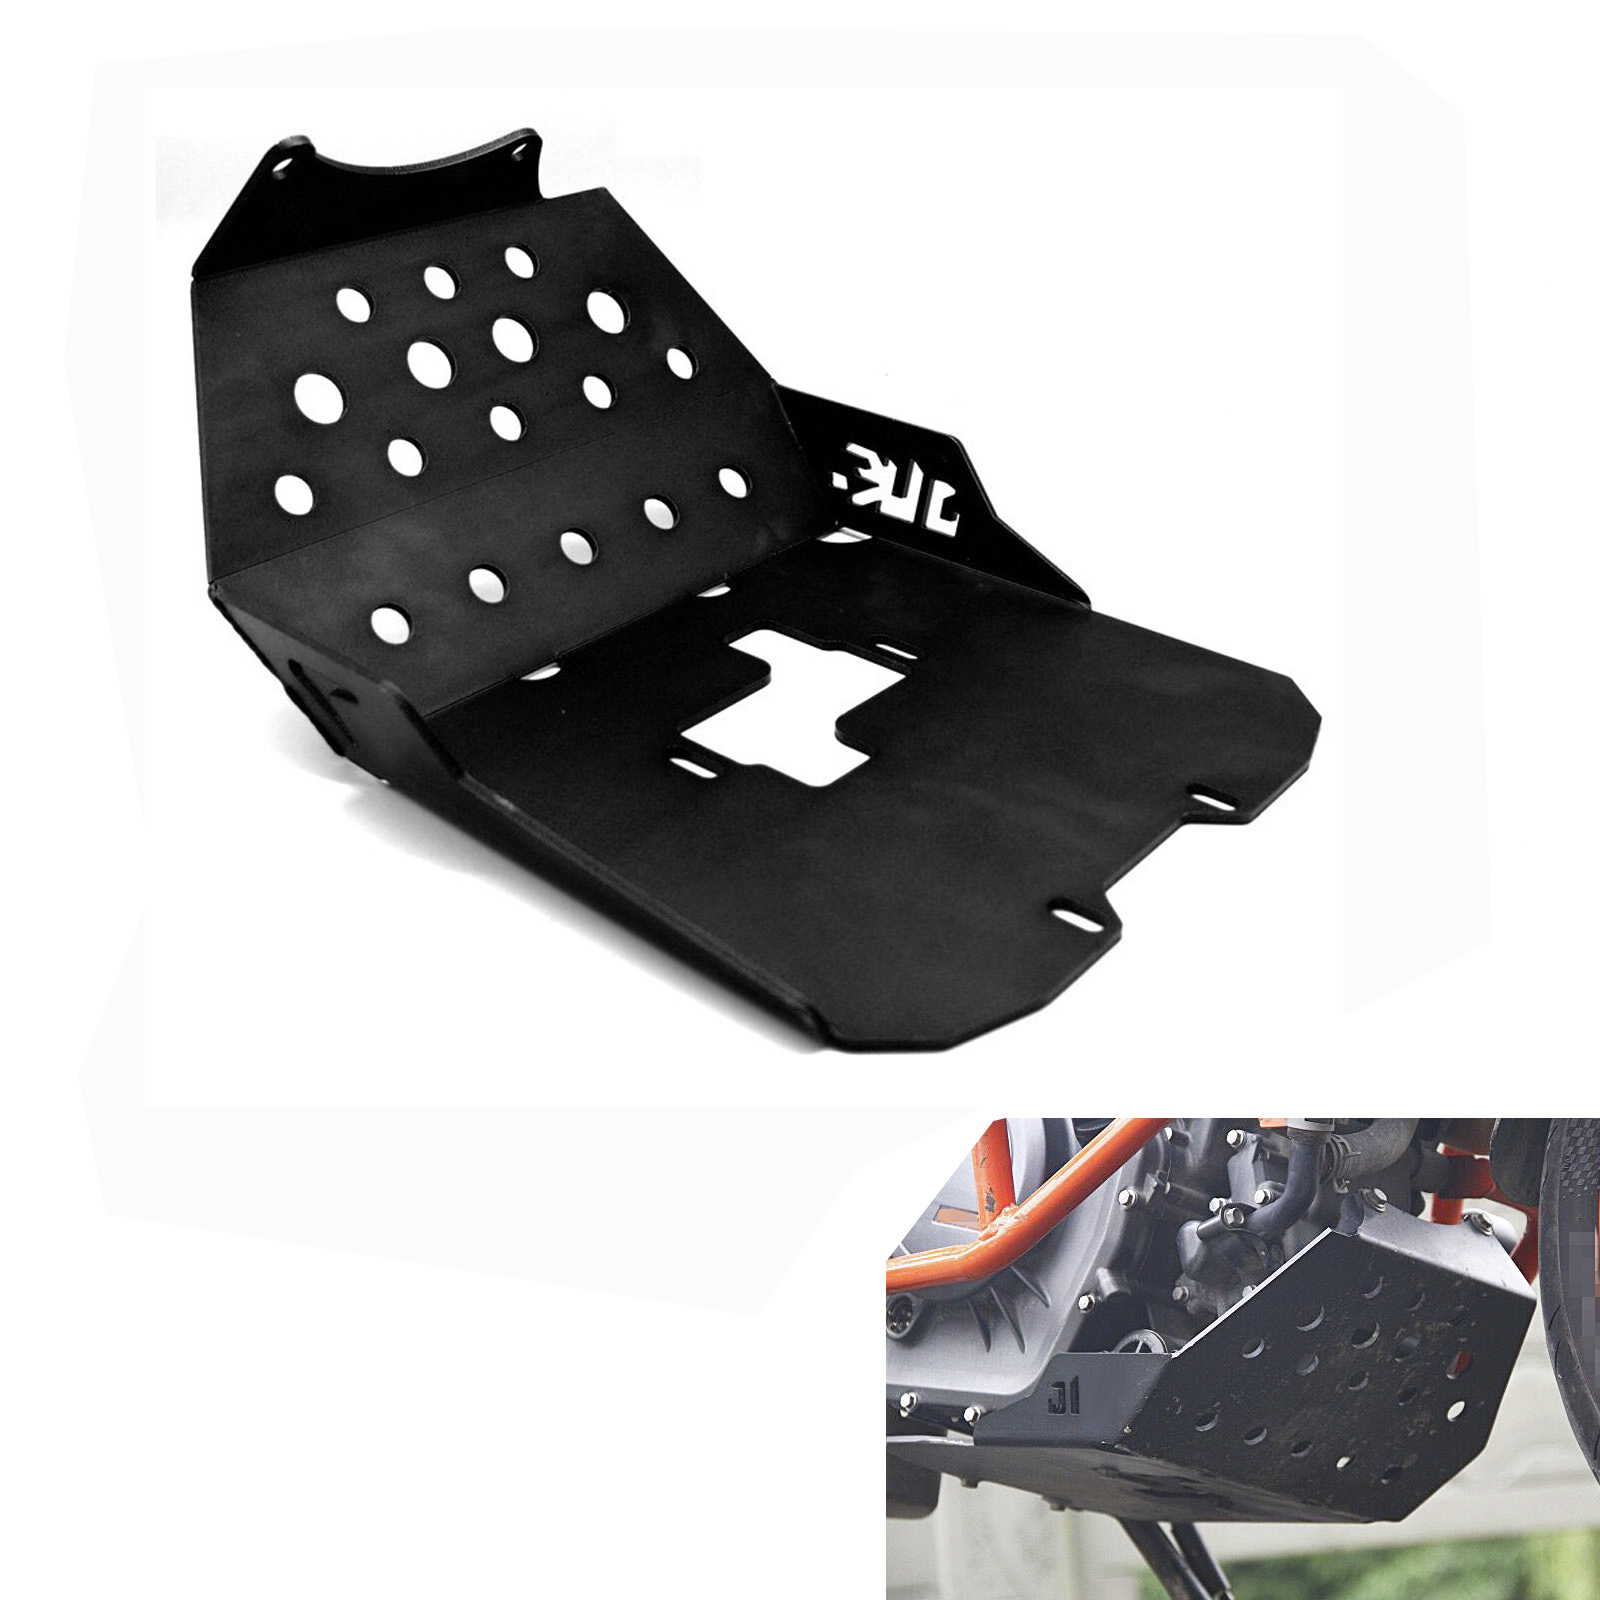 Aluminum Motorcycle Engine Guard Protector Skid Plate For KTM DUKE 390 13-16